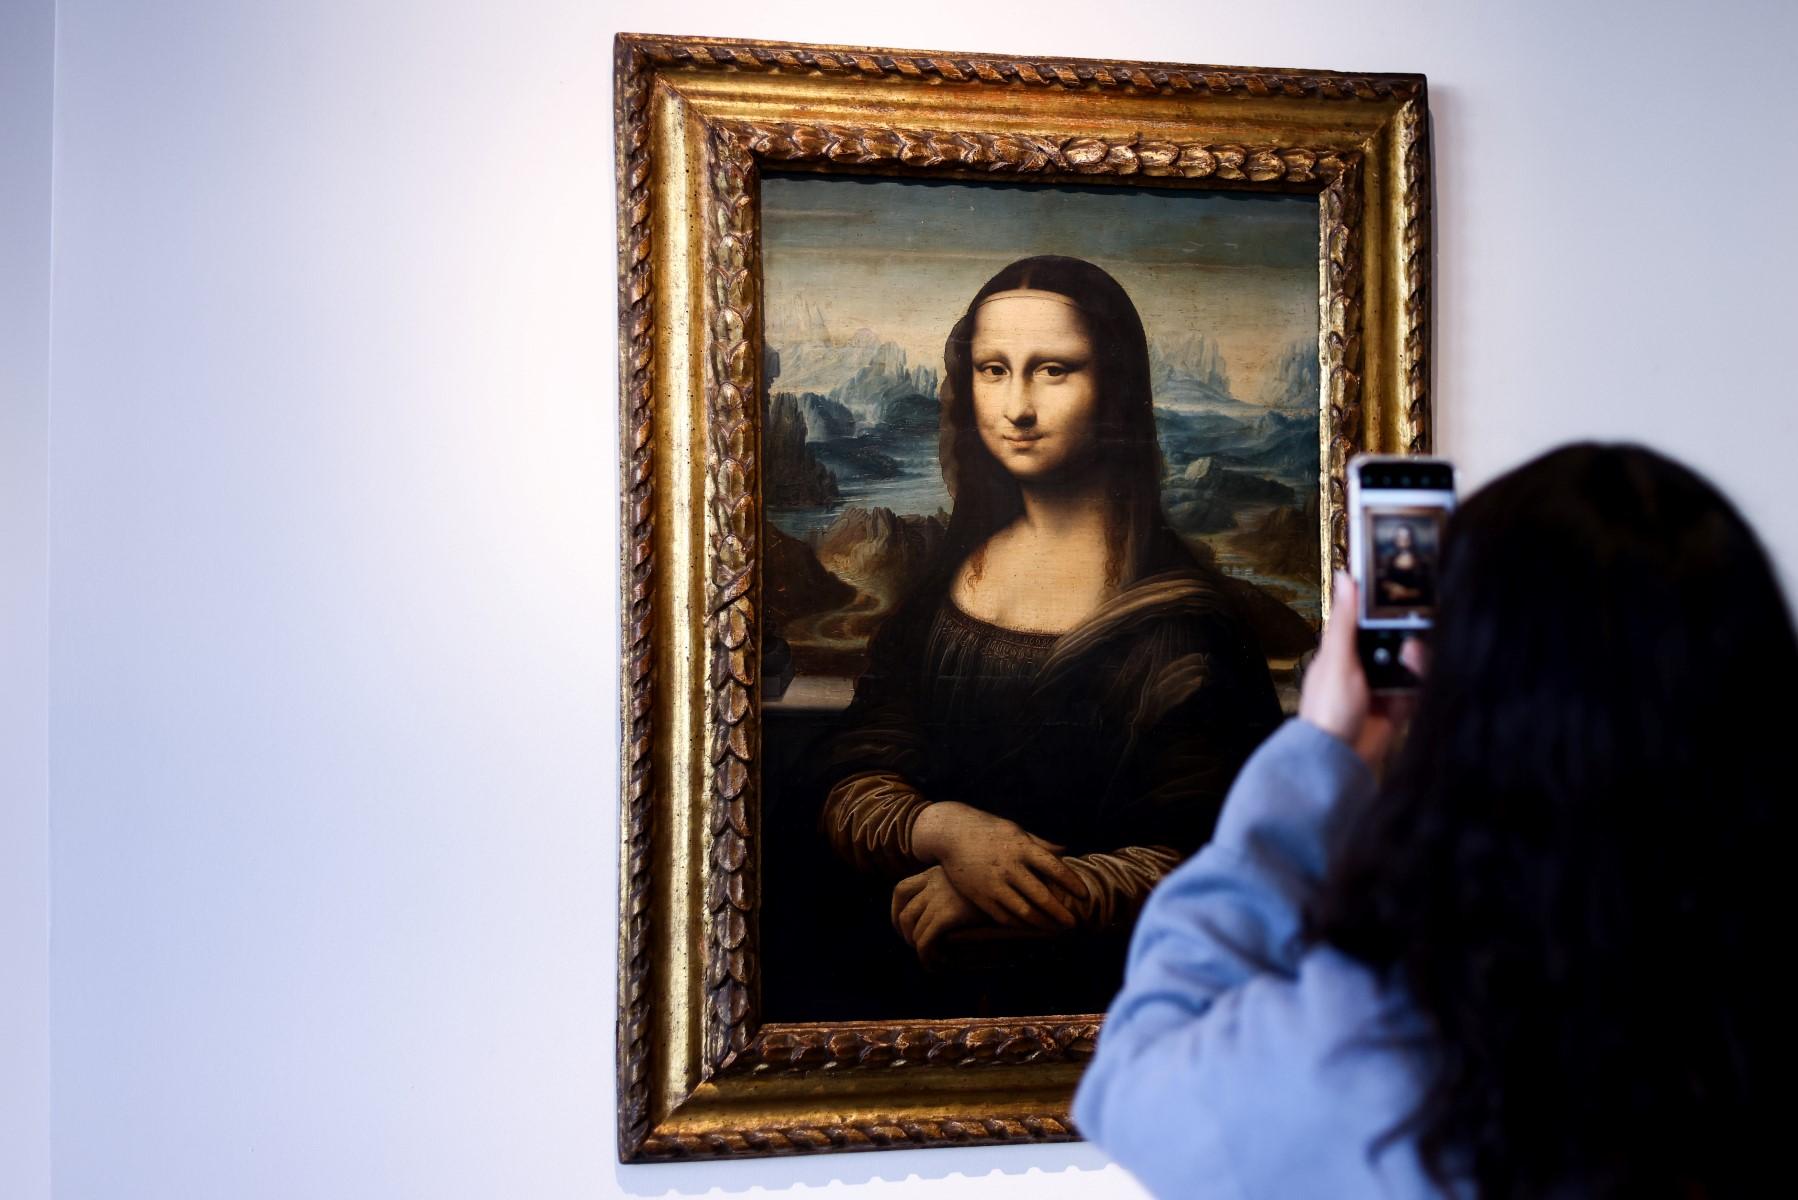 A visitor takes of photo of a copy of Leonardo da Vinci's Mona Lisa, painted around 1600, presented at auction house Artcurial in Brussels on Oct 27, 2021. Photo: AFP